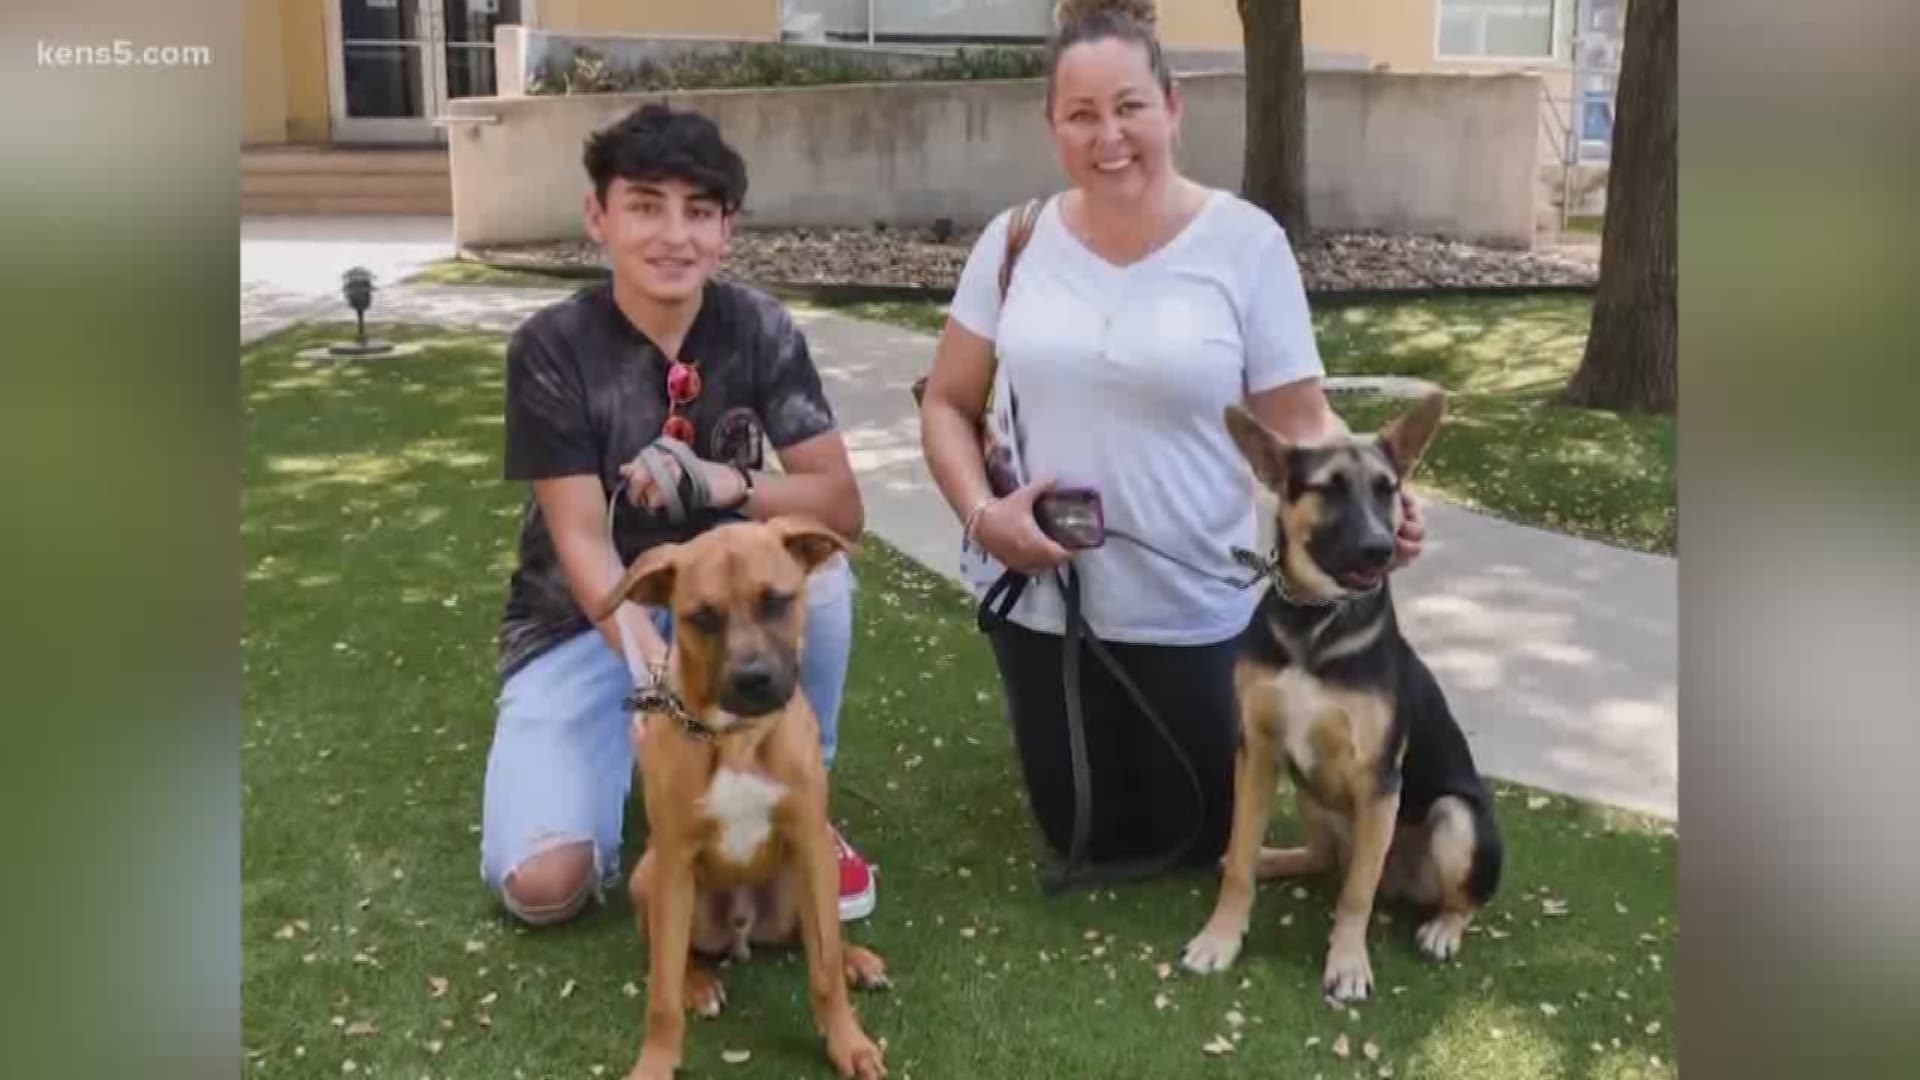 Gabe and Banjo ended up a the San Antonio Humane Society with five broken legs between them.